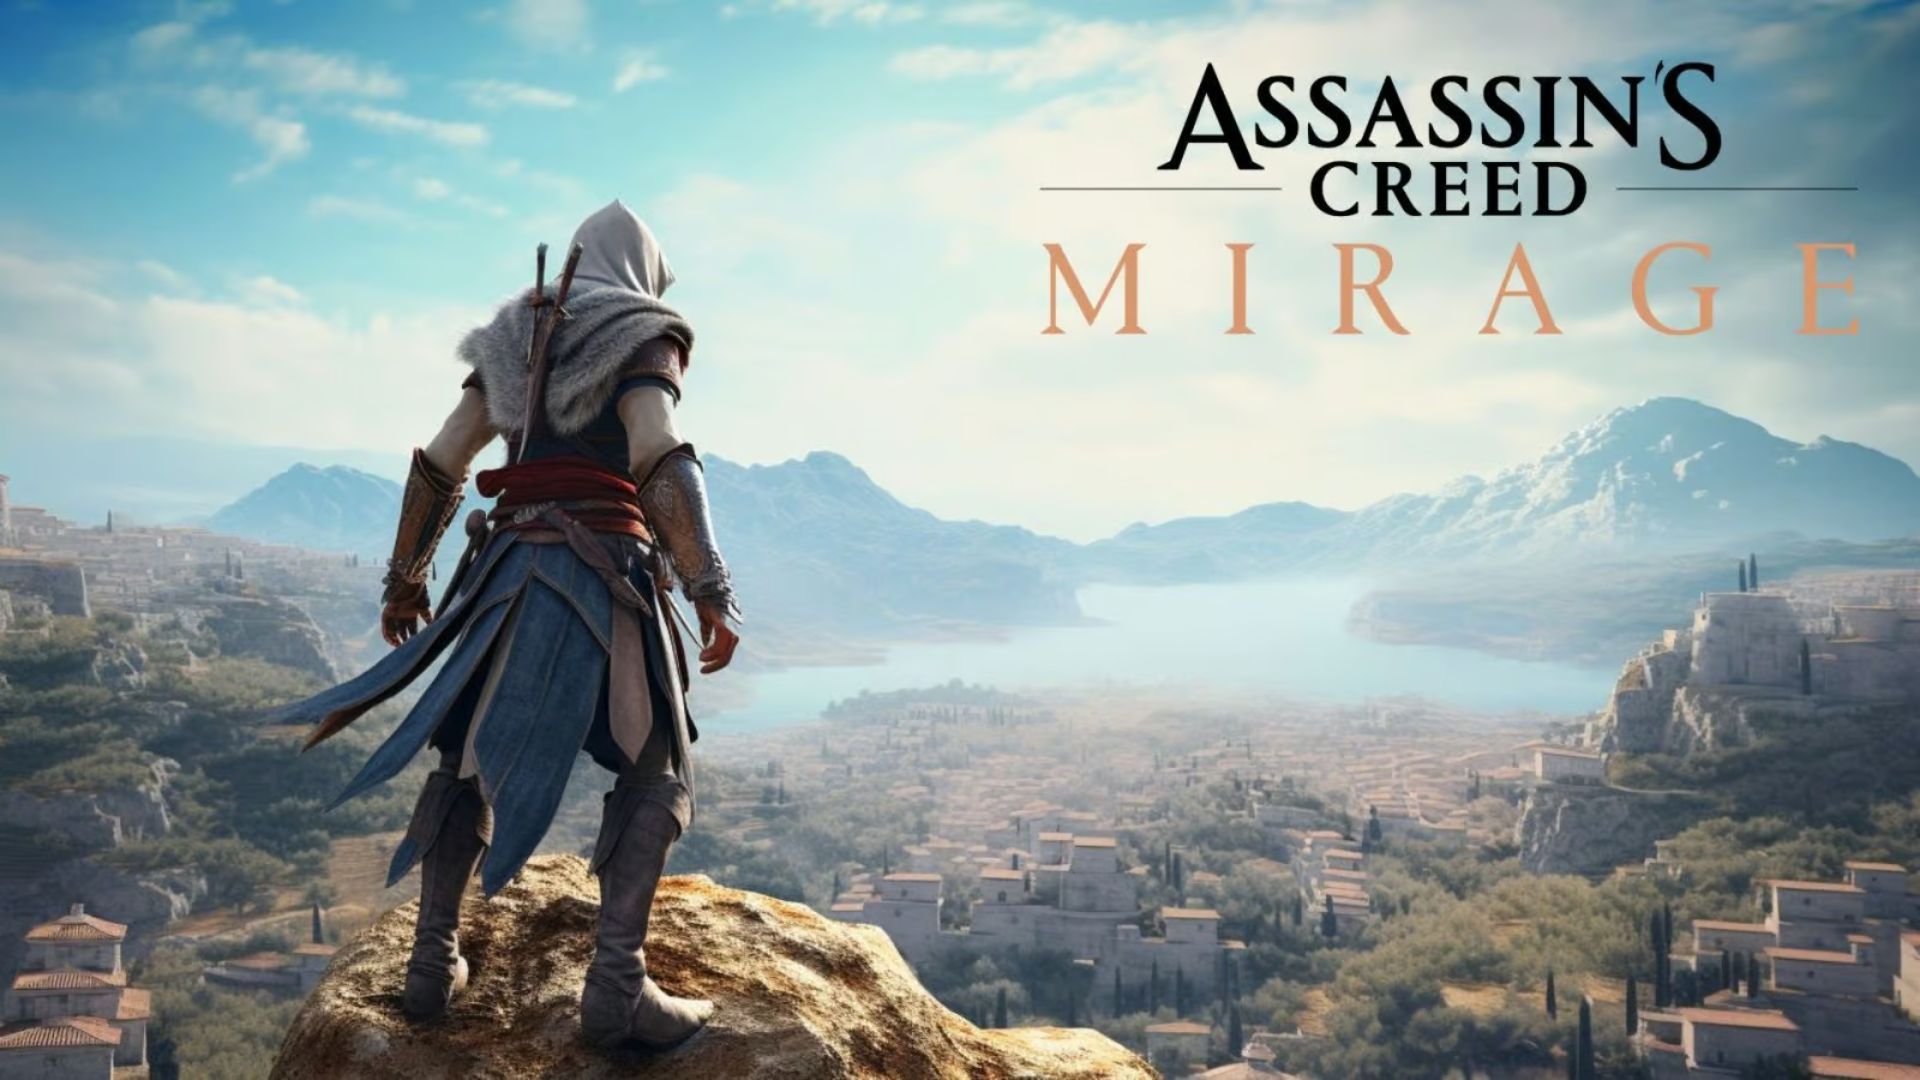 News - Drama - Platform - Ubisoft added Denuvo to Assassins Creed: Mirage  via a day-1 patch shortly after all the major reviews went online